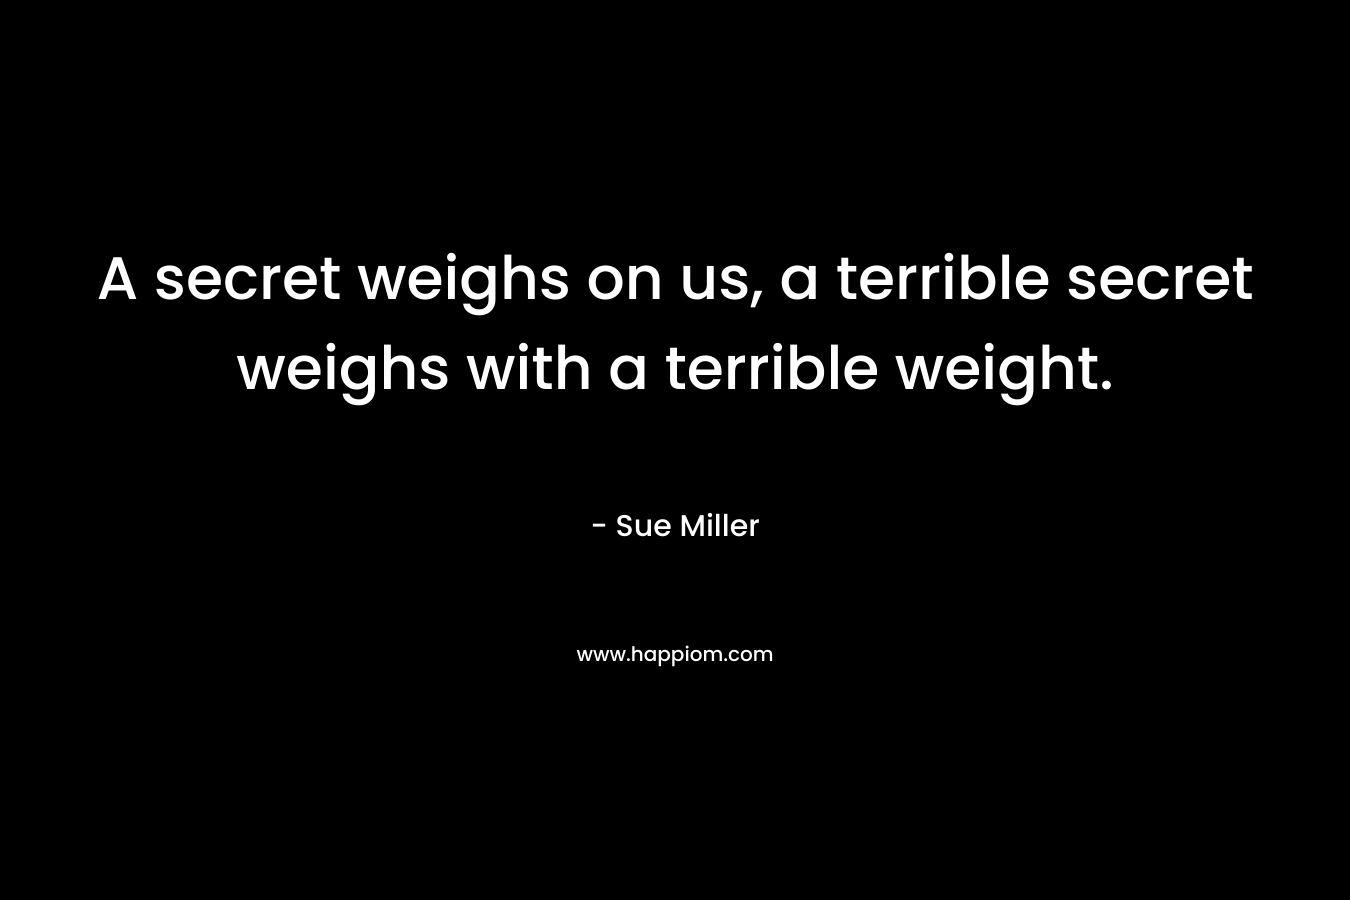 A secret weighs on us, a terrible secret weighs with a terrible weight. – Sue Miller